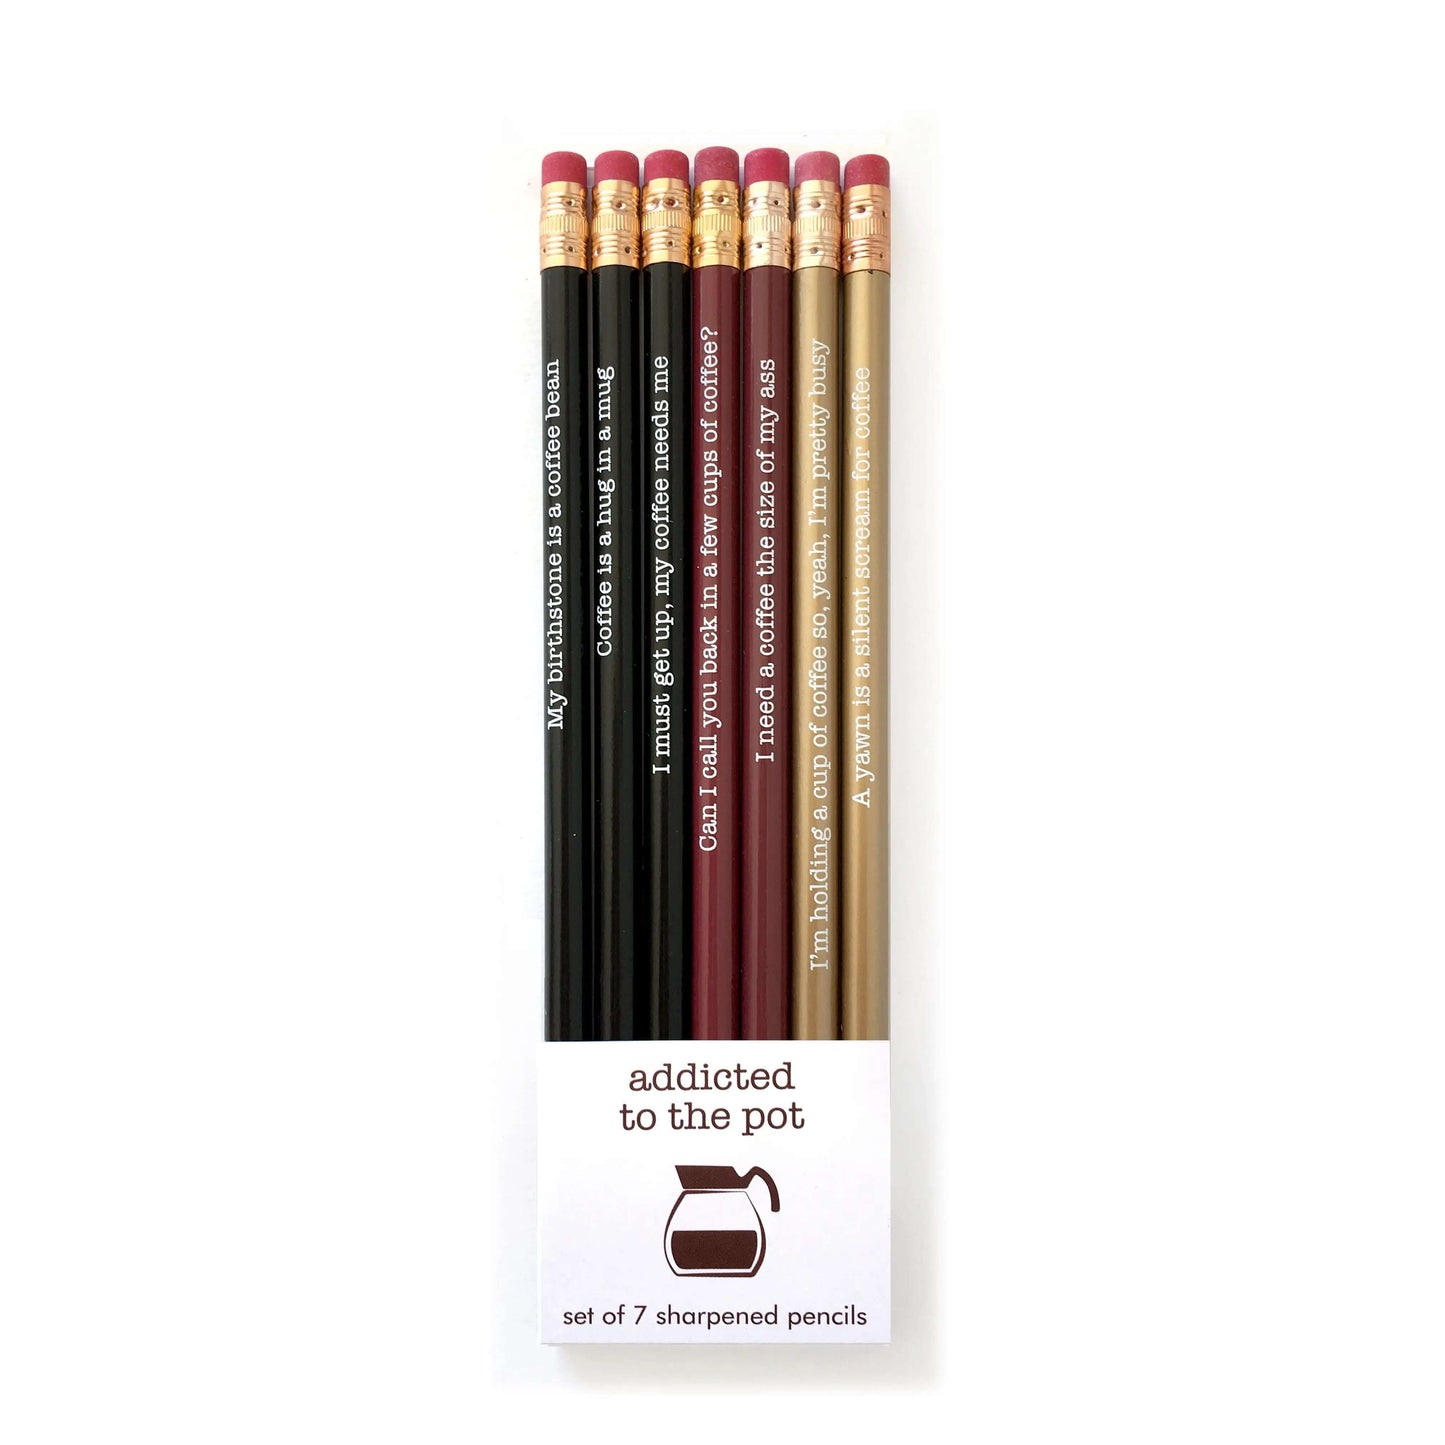 Snifty Funny Coffee Addicted to the Pot Pencil Set, Pencil Sets for £4.75